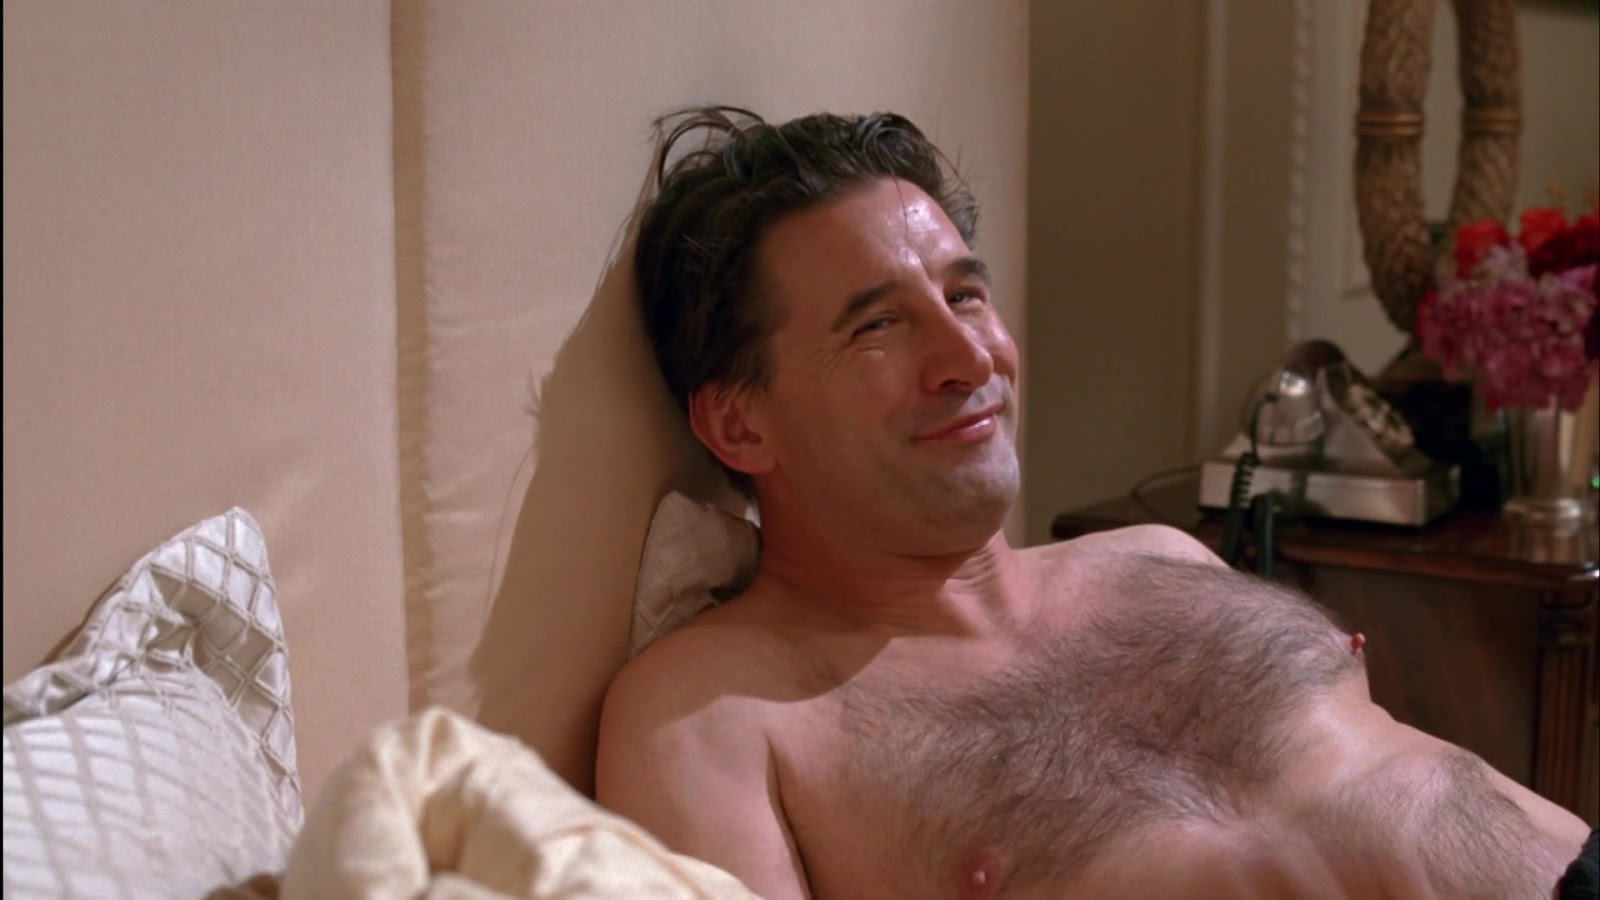 William Baldwin shirtless in Dirty Sexy Money 1-10 "The Nutcracker&quo...